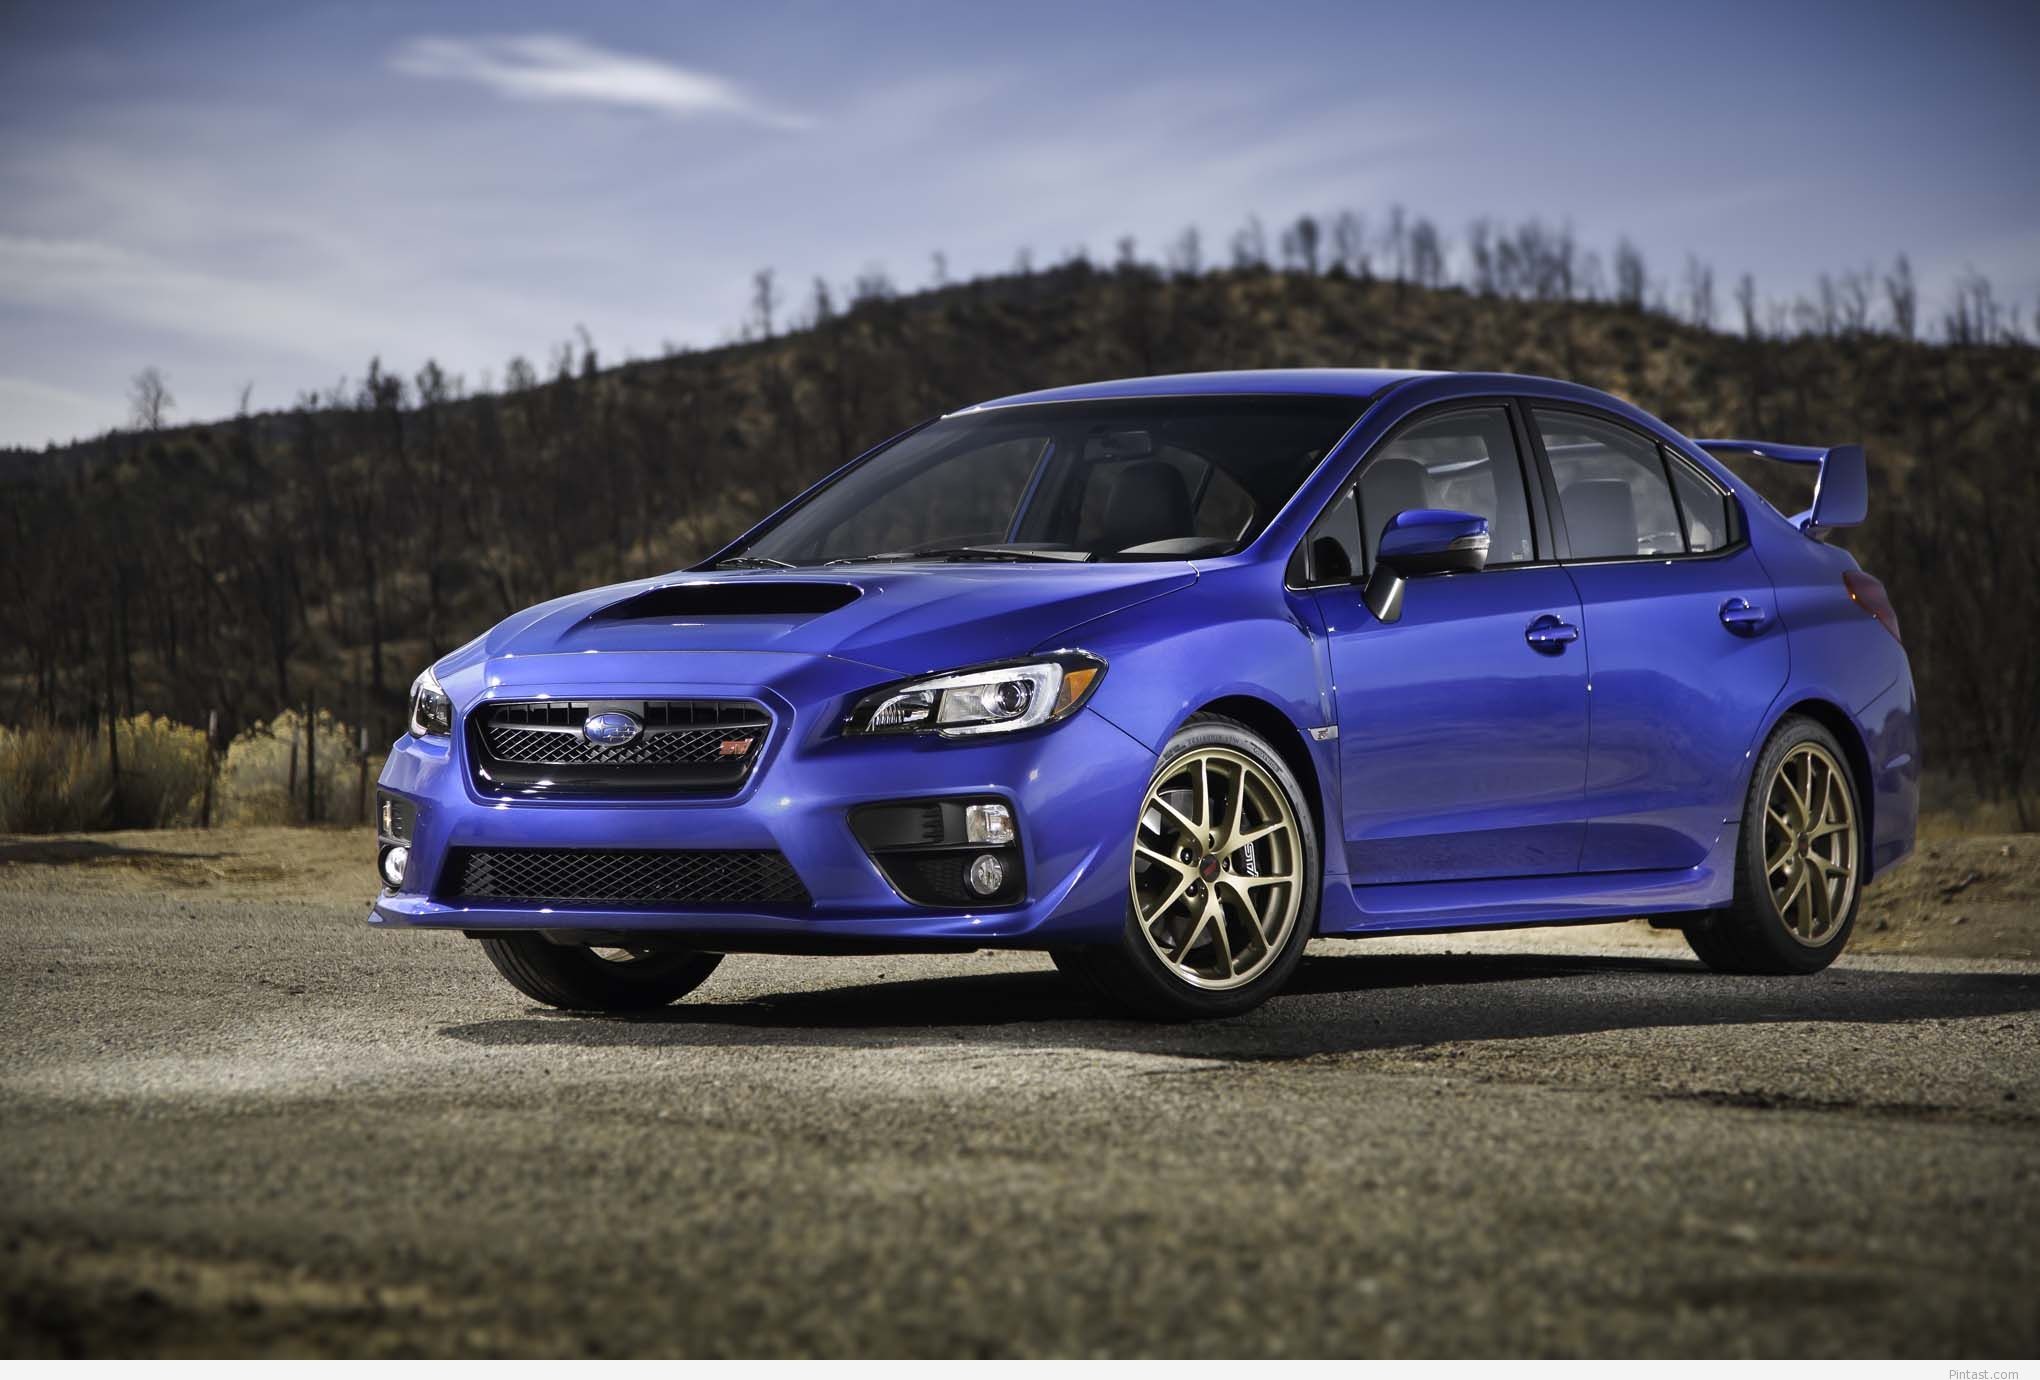 The 10 Best Subaru Vehicle Fan Shots Of 2021 - STI Wins For Most Passion |  Torque News